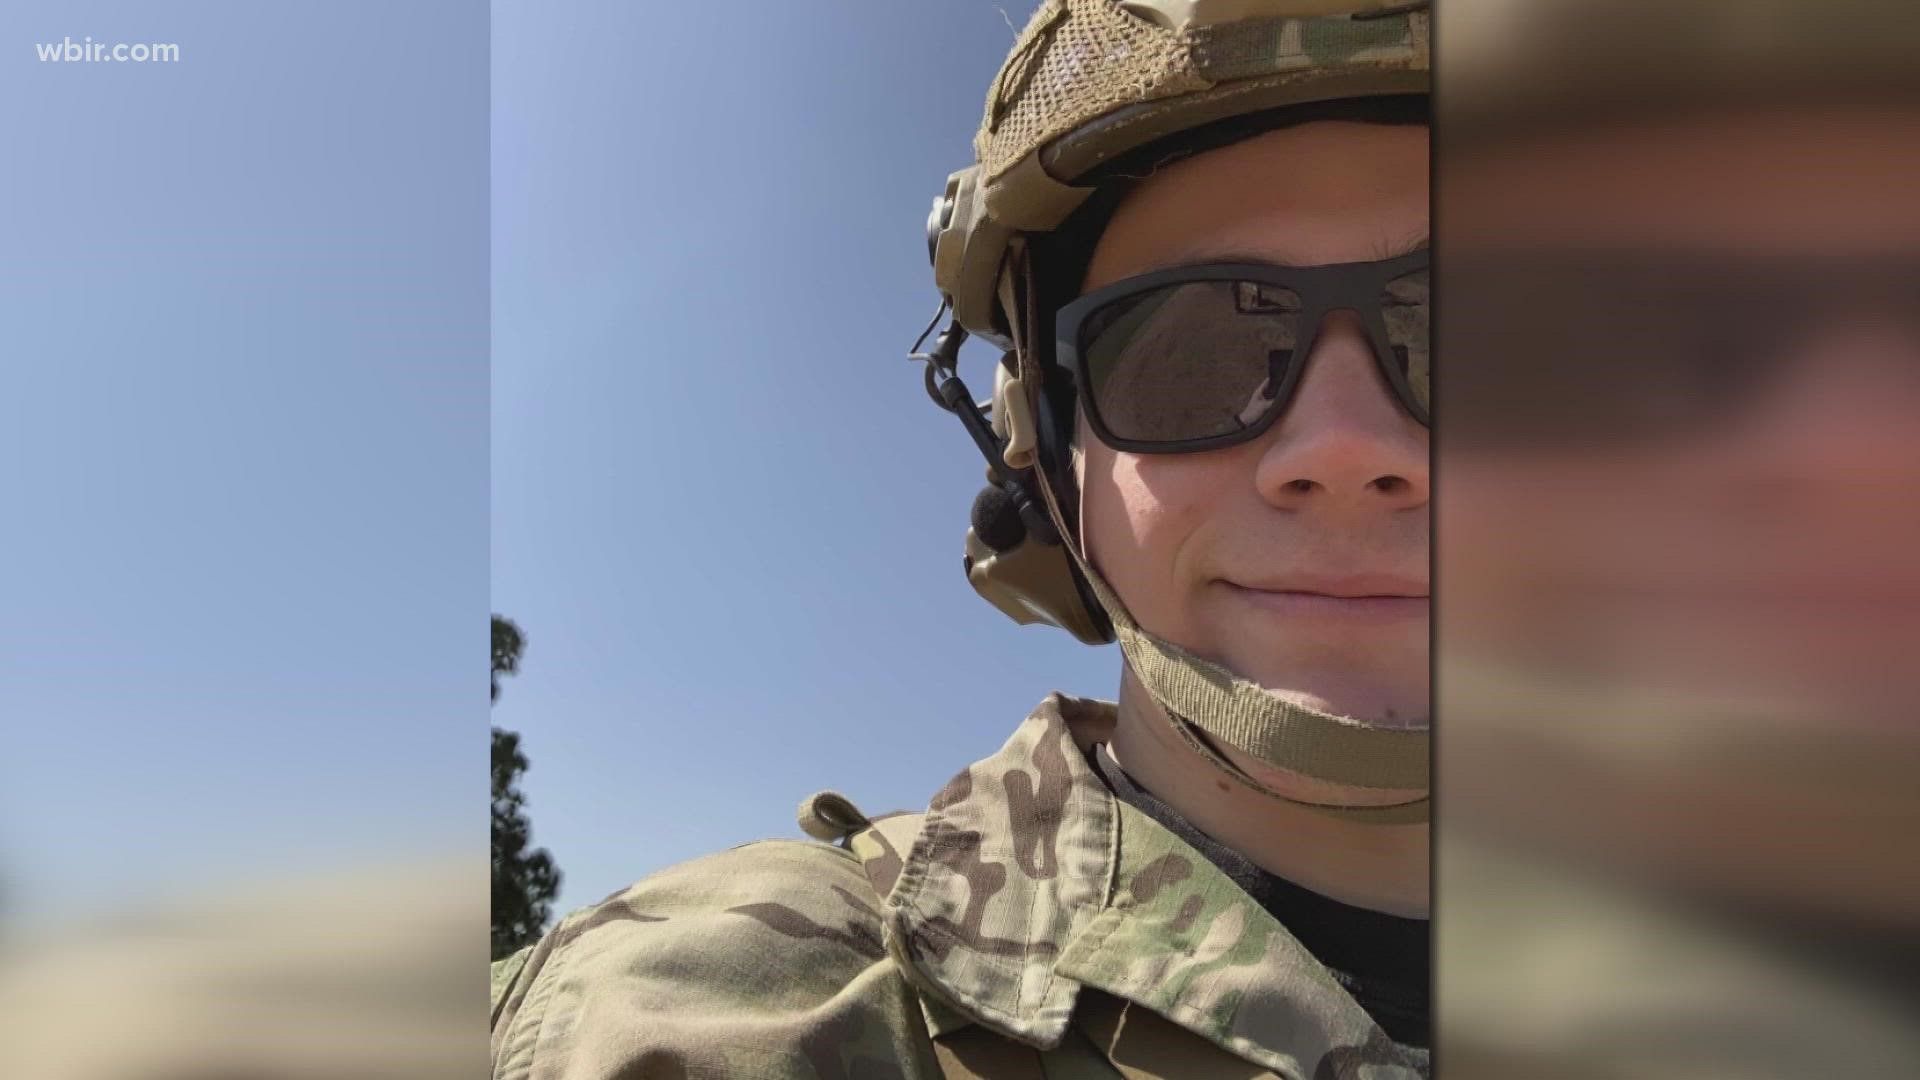 "I'm very honored, humbled, and I was blessed to be his dad," said Greg Knauss, reflecting on his soldier son, Ryan. He was killed in August 2021 in Afghanistan.